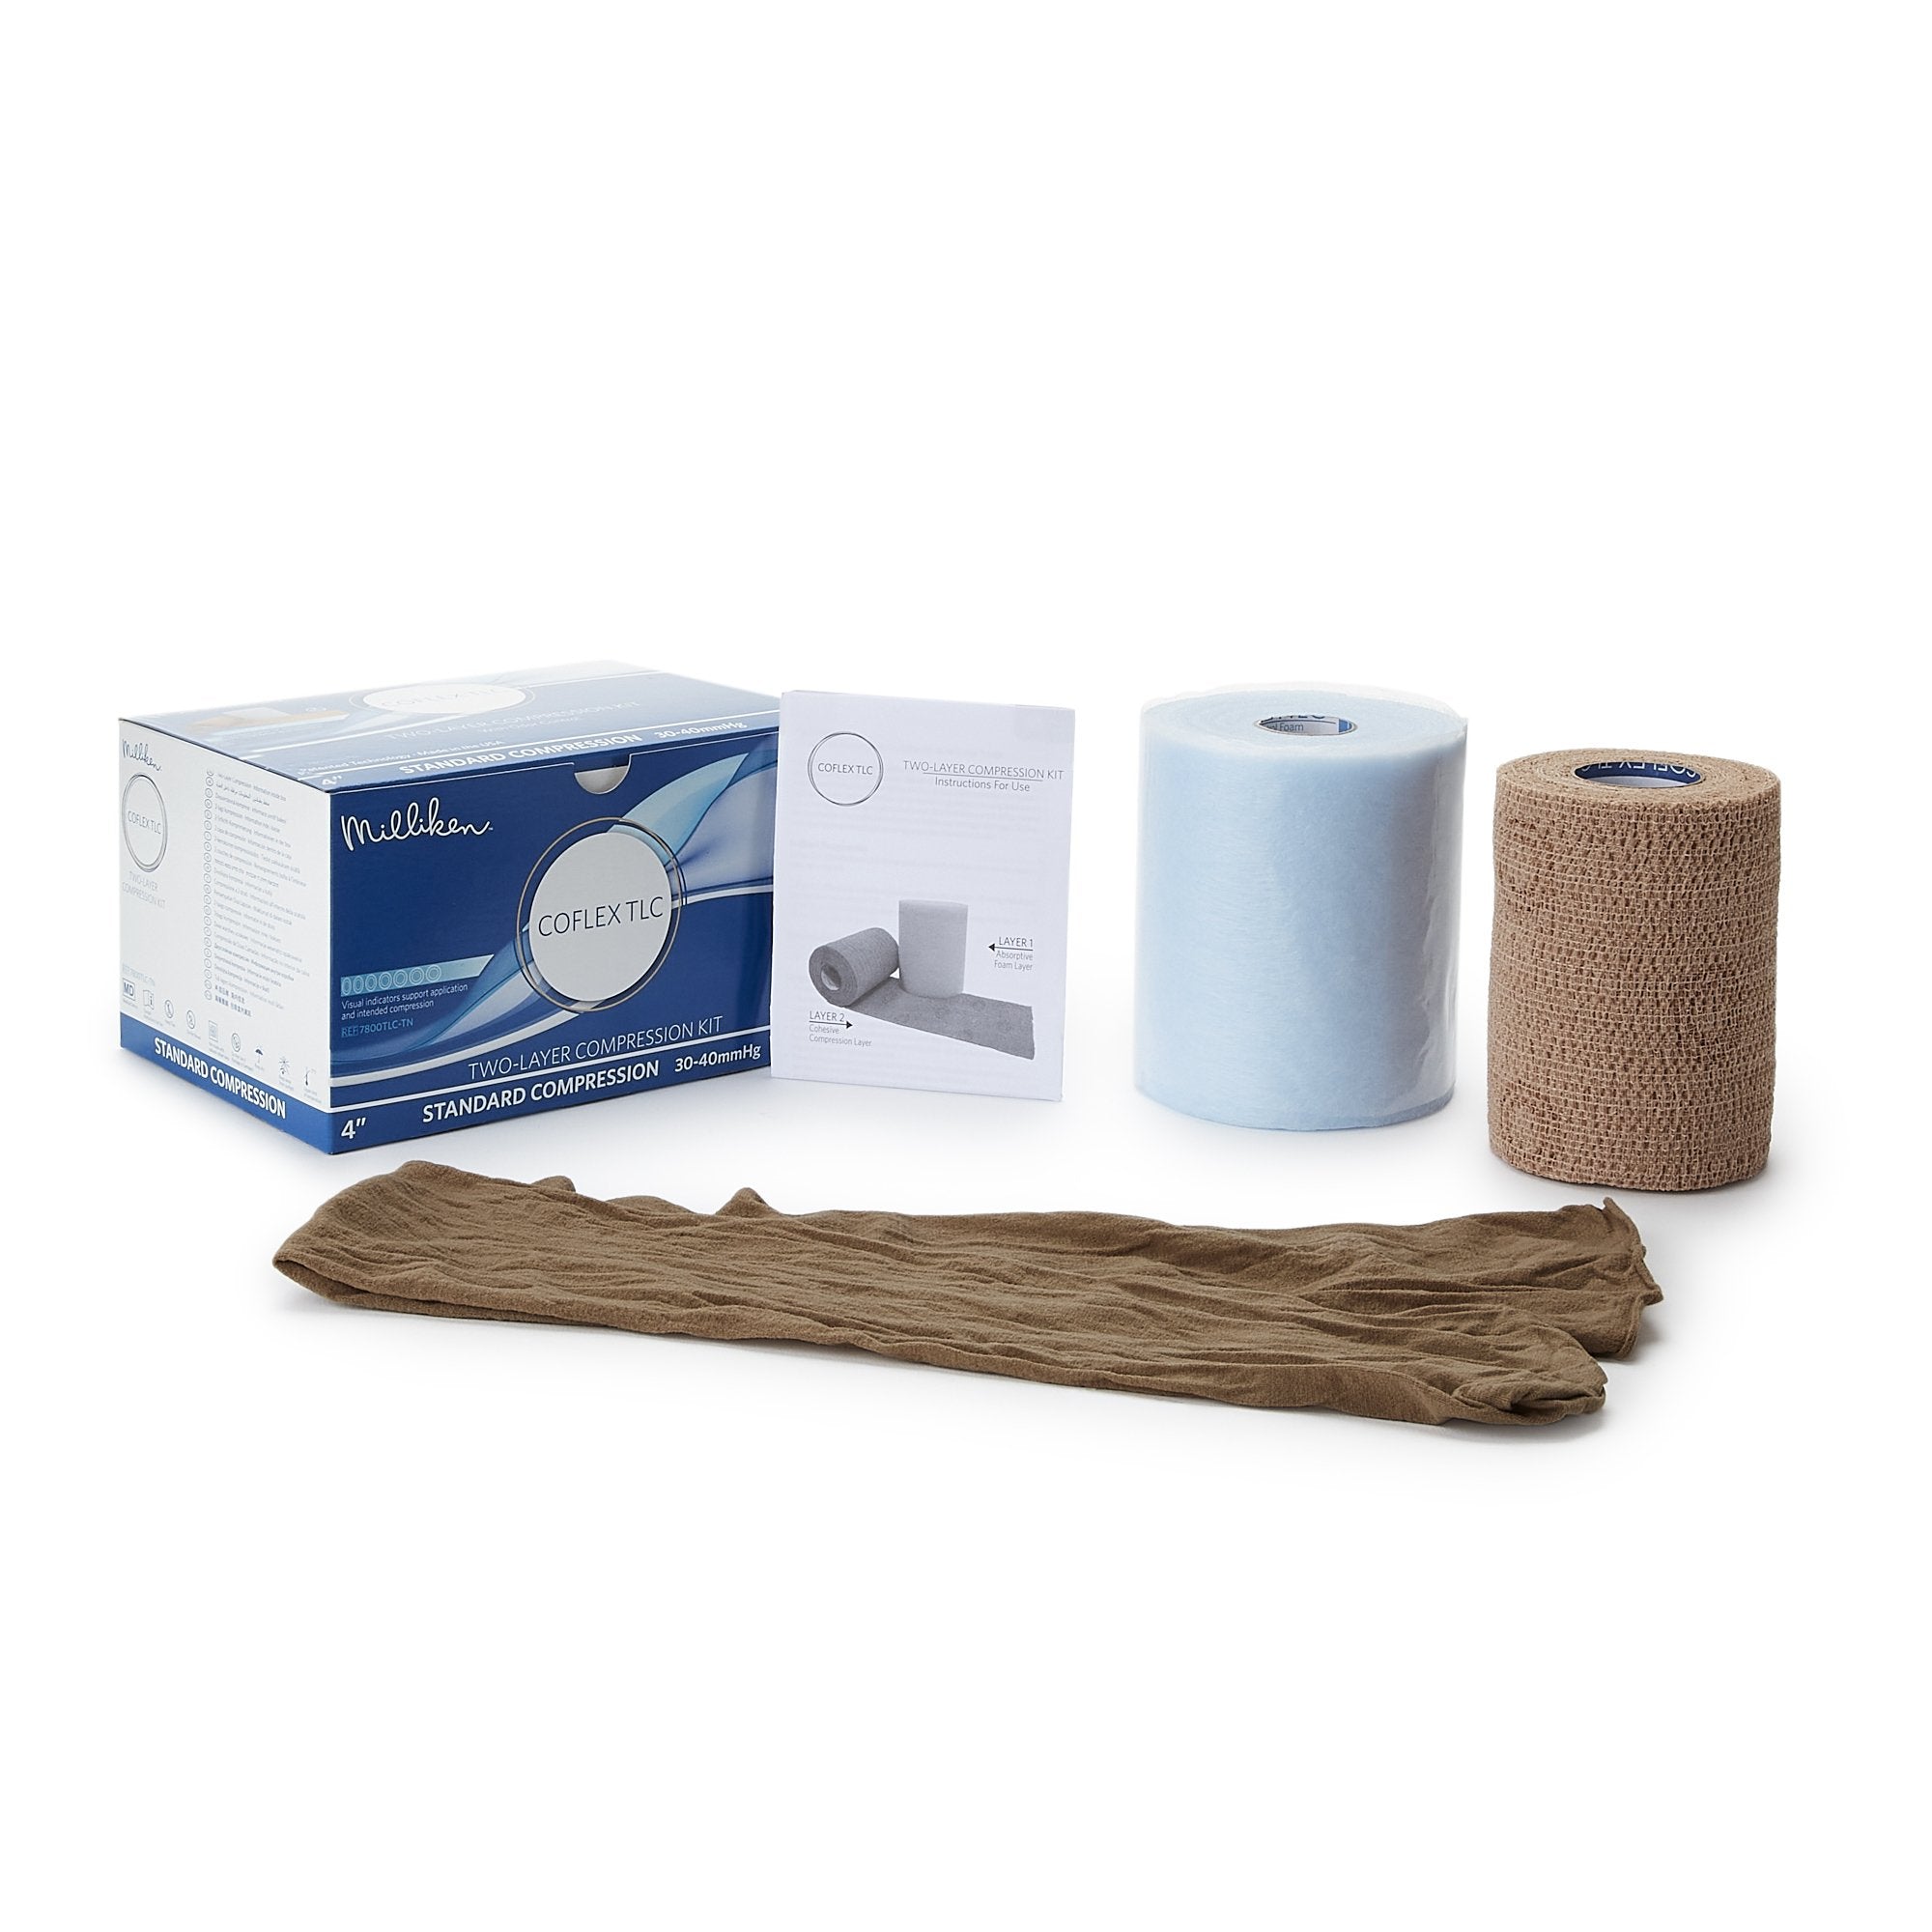 2 Layer Compression Bandage System CoFlex® TLC with Indicators 4 Inch X 3-2/5 Yard / 4 Inch X 5-1/10 Yard Self-Adherent / Pull On Closure Tan NonSterile 35 to 40 mmHg